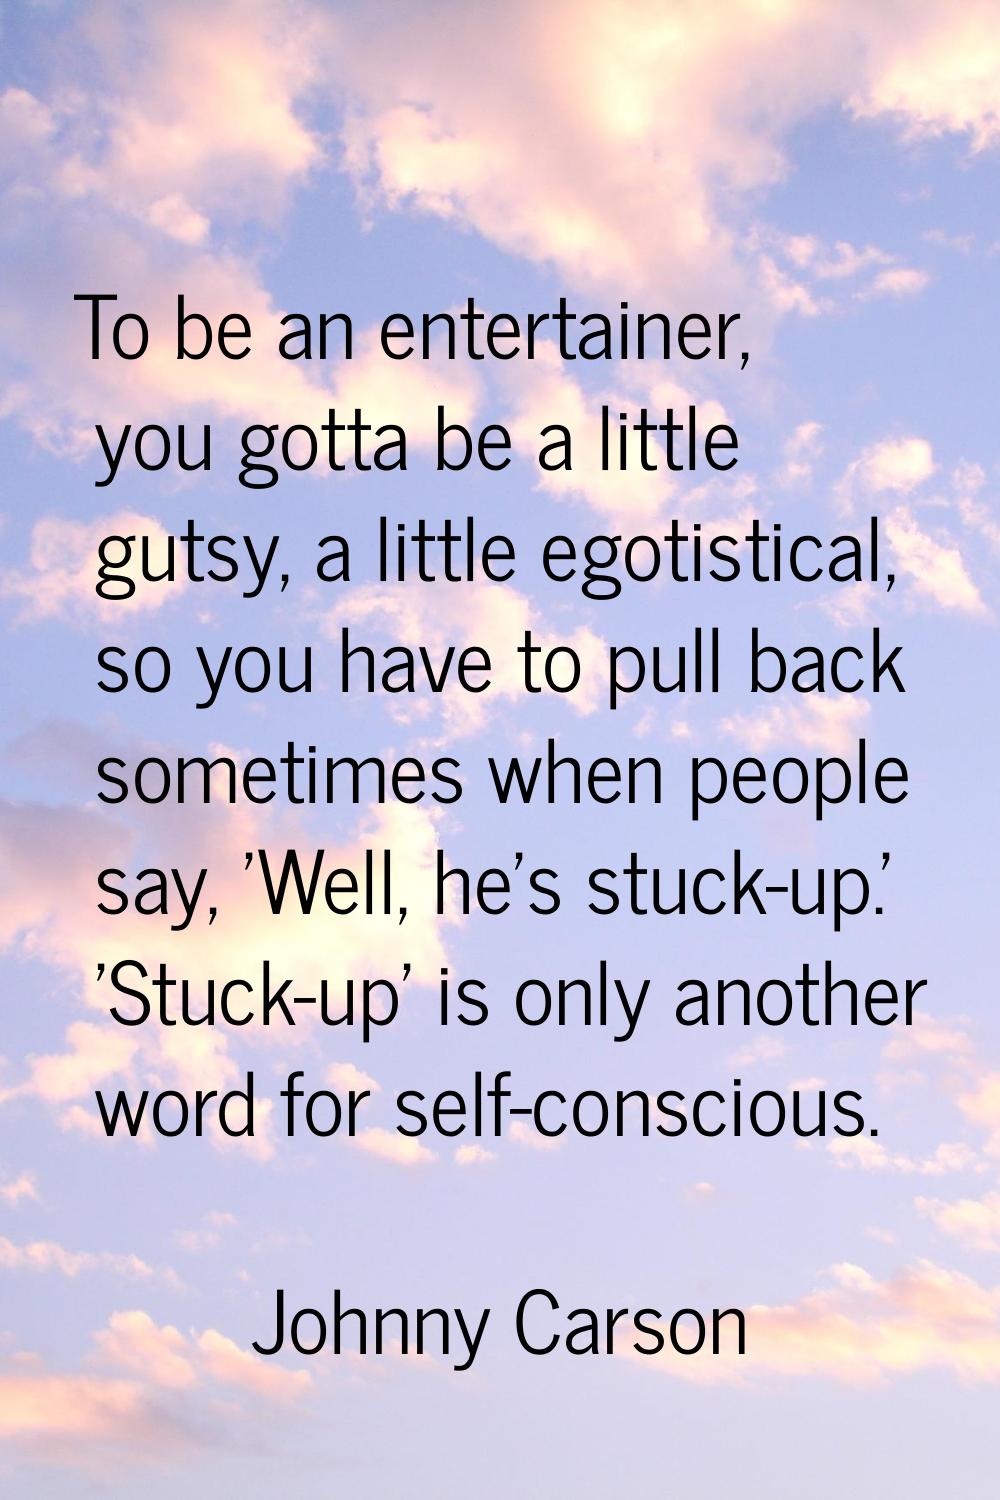 To be an entertainer, you gotta be a little gutsy, a little egotistical, so you have to pull back s